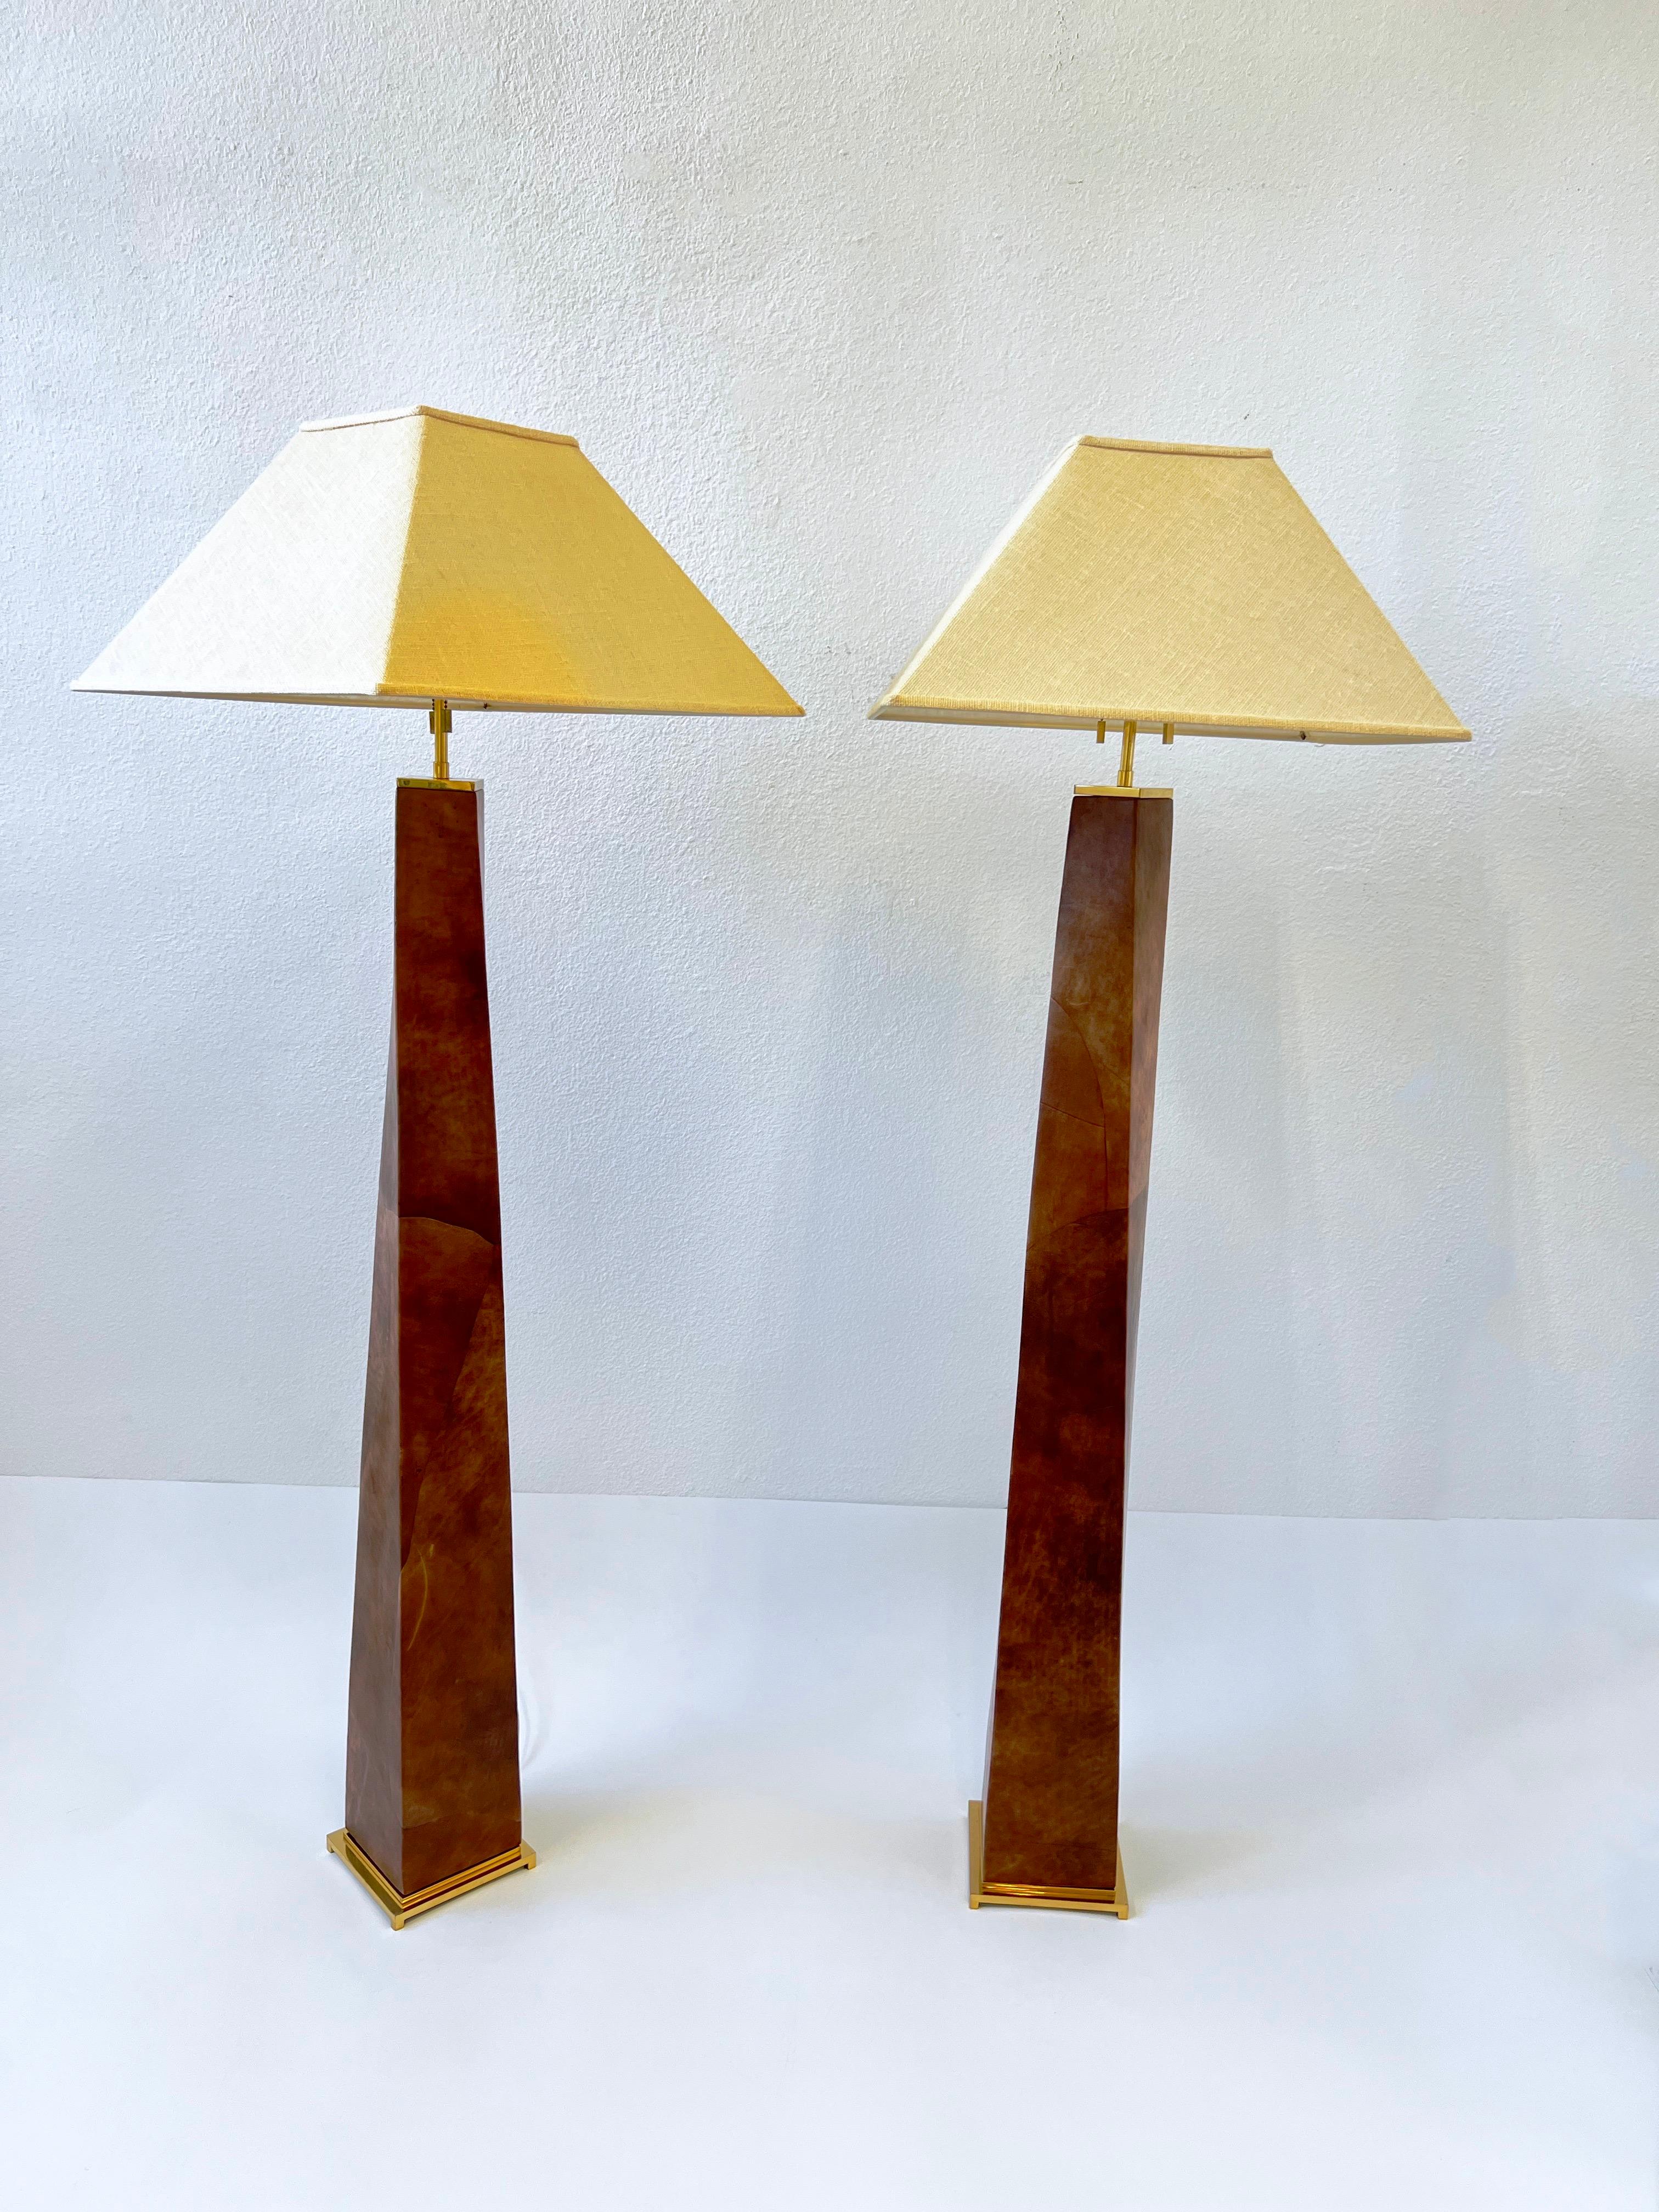 A spectacular pair of 1980’s polish brass and leather J.M.F. floor lamps by renowned American designer Karl Springer. The lamps are constructed of solid brass and wood that’s covered In a patchwork saddle tan leather. The shades are burlap.

Newly